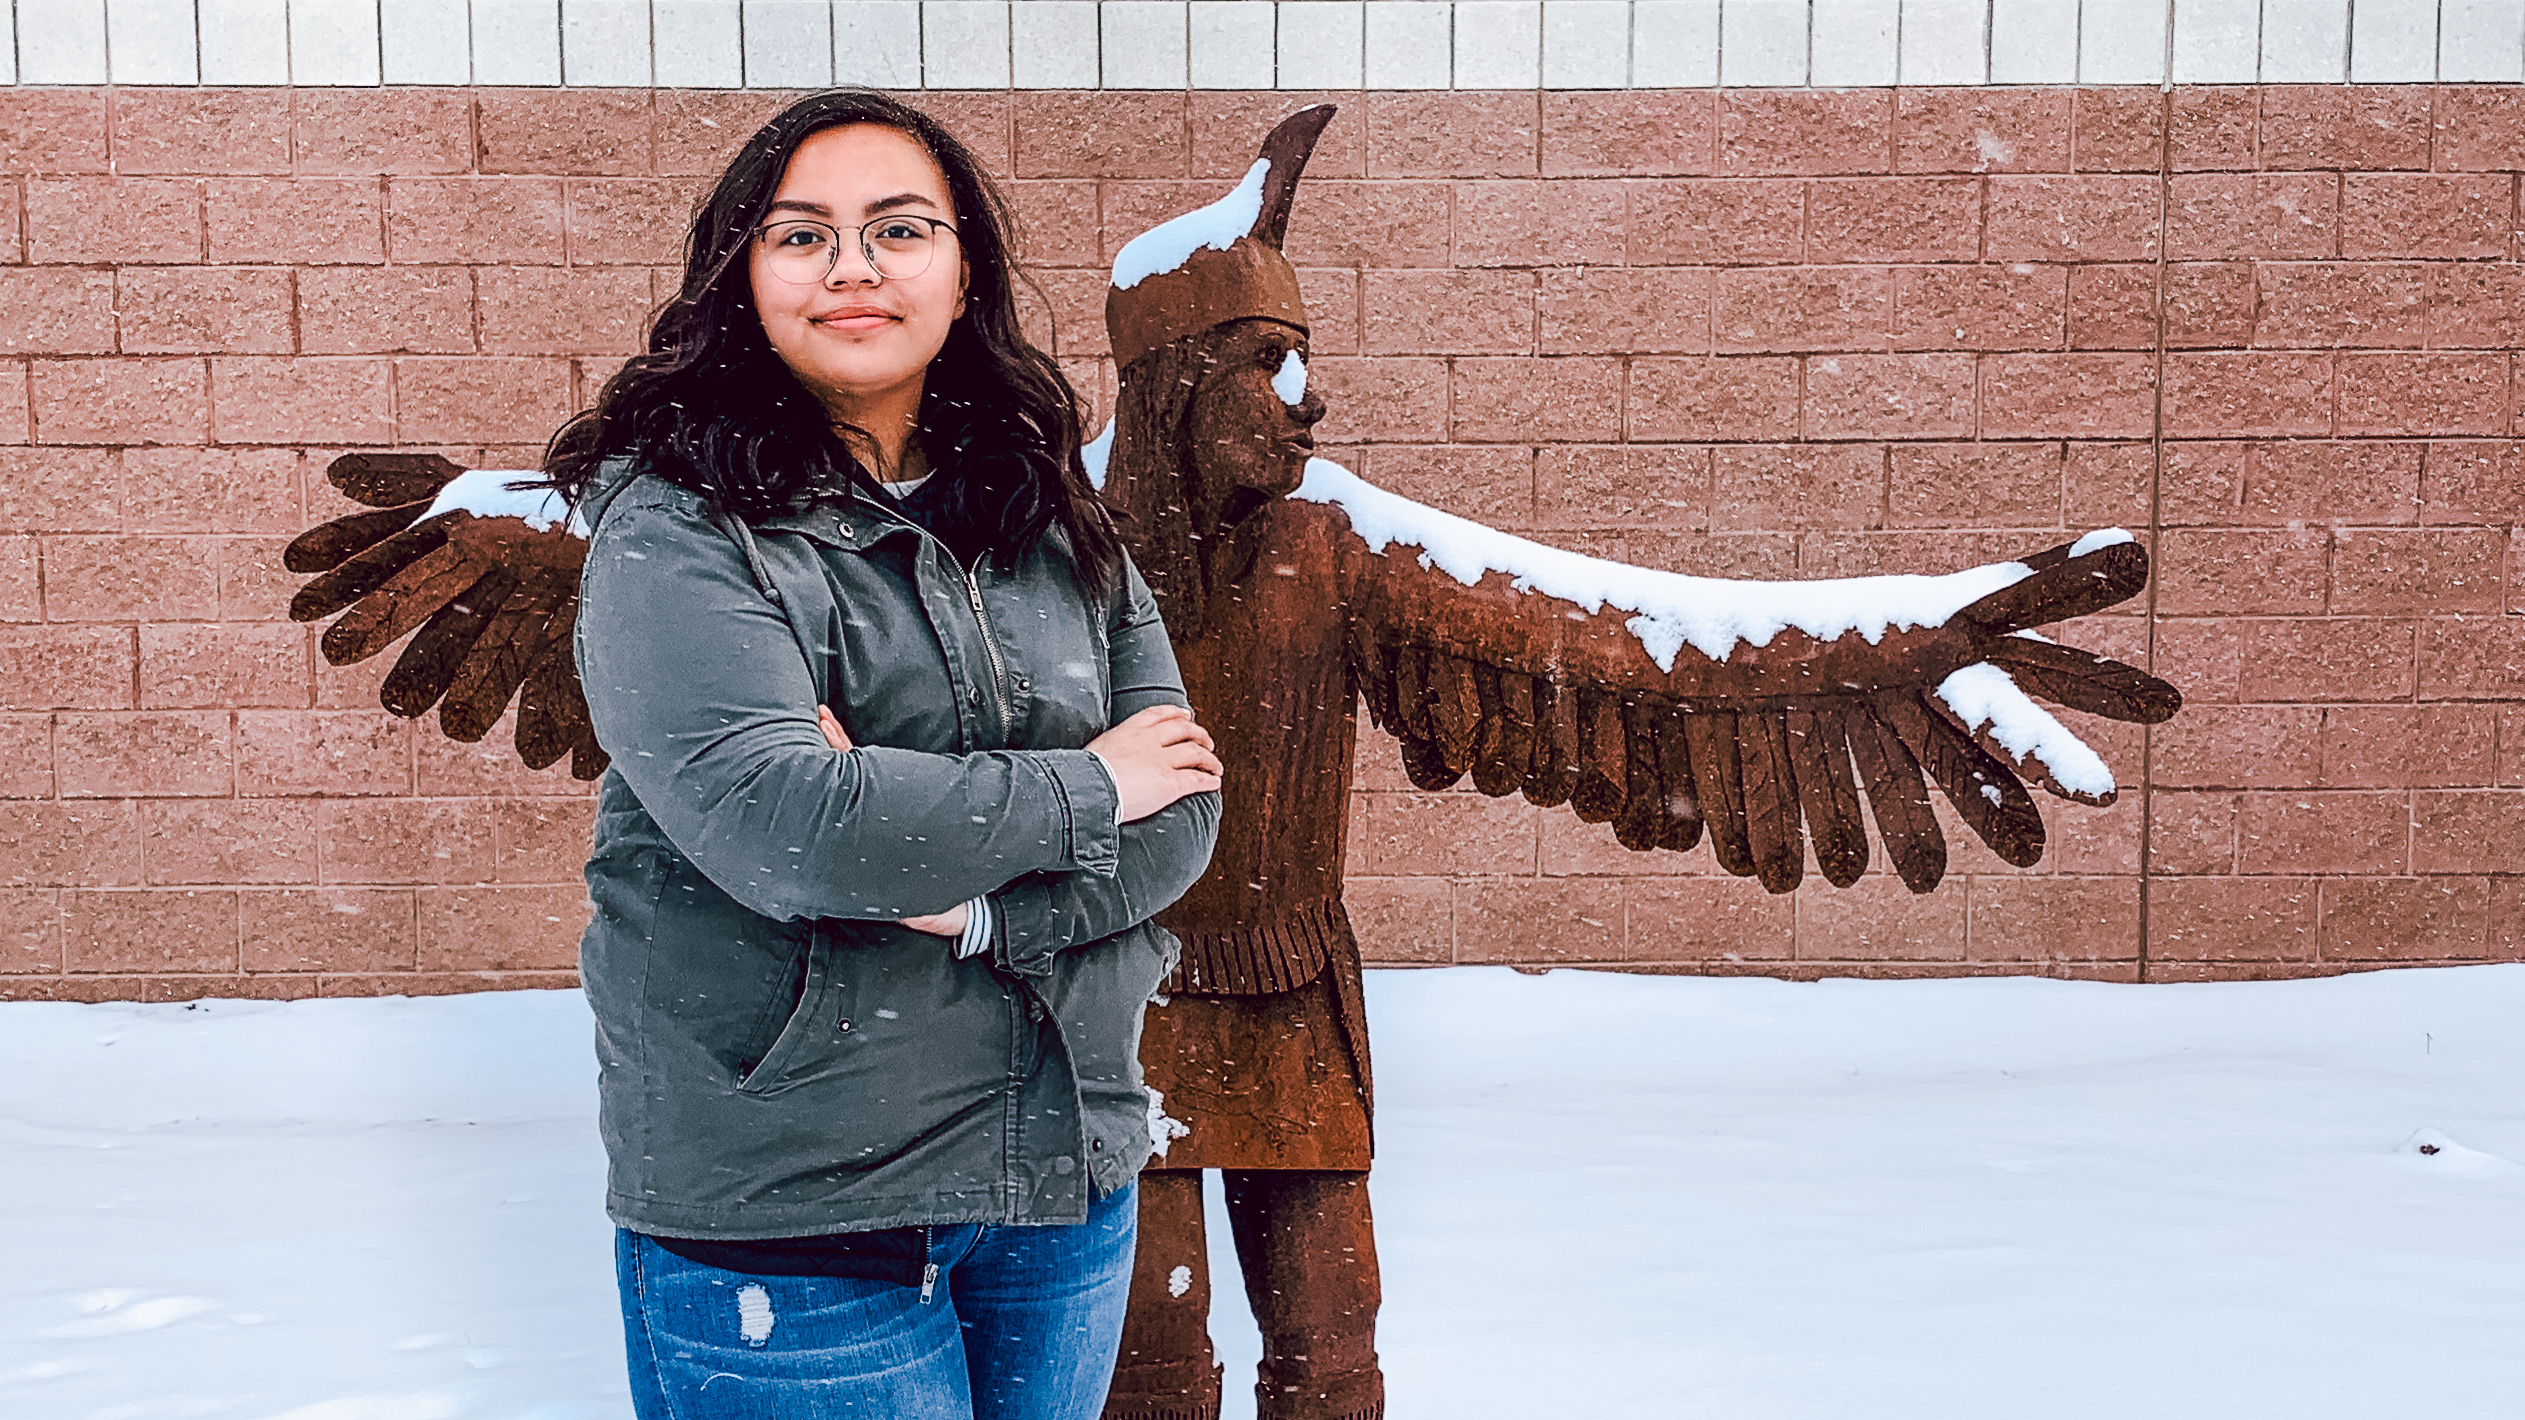 A photo of Josephine Troxell, high school senior at Nah Tah Wahsh Public School Academy, standing in front of a Native American wooden sculpture on her school grounds.